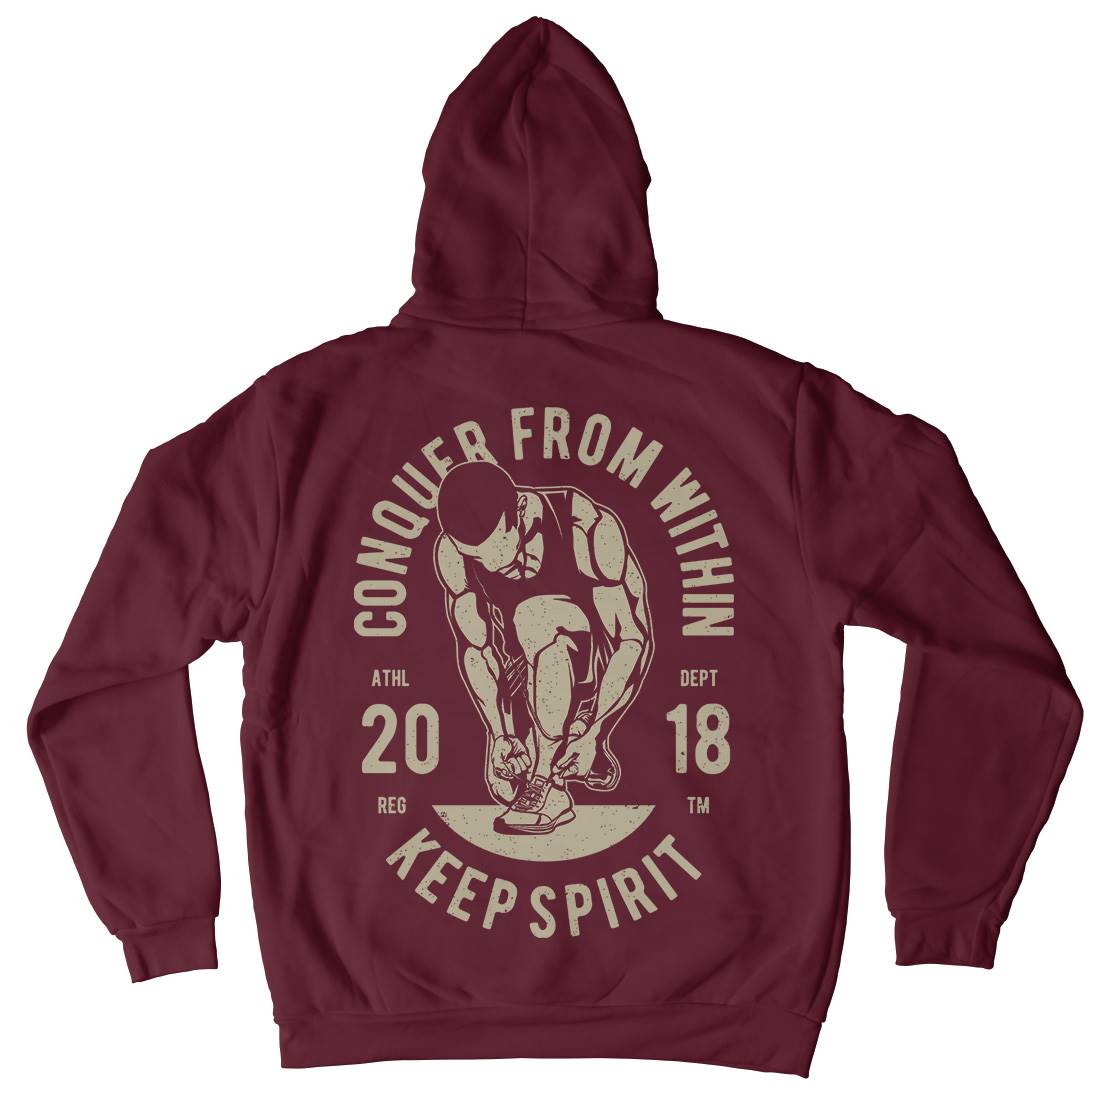 Conquer From Within Mens Hoodie With Pocket Sport A638